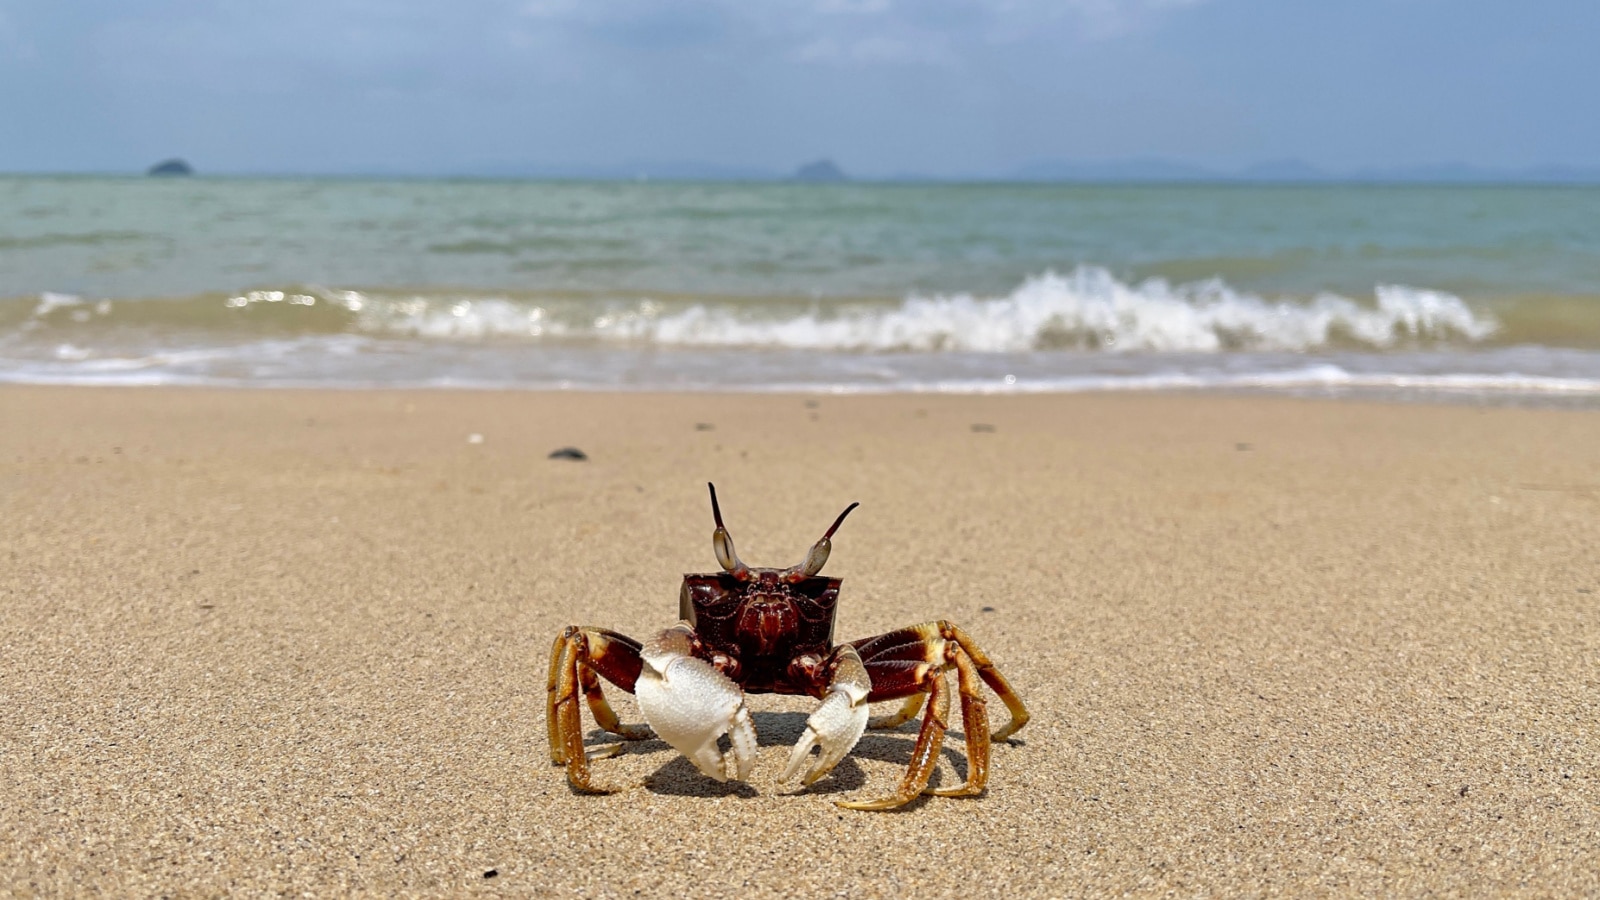 Crab on the beach. Horned ghost crab(Ocypode ceratophthalmus) or horn-eyed ghost crab. It lives in Indo-Pacific region from the coast of East Africa to Philippines, Japan to the Great Barrier Reef.